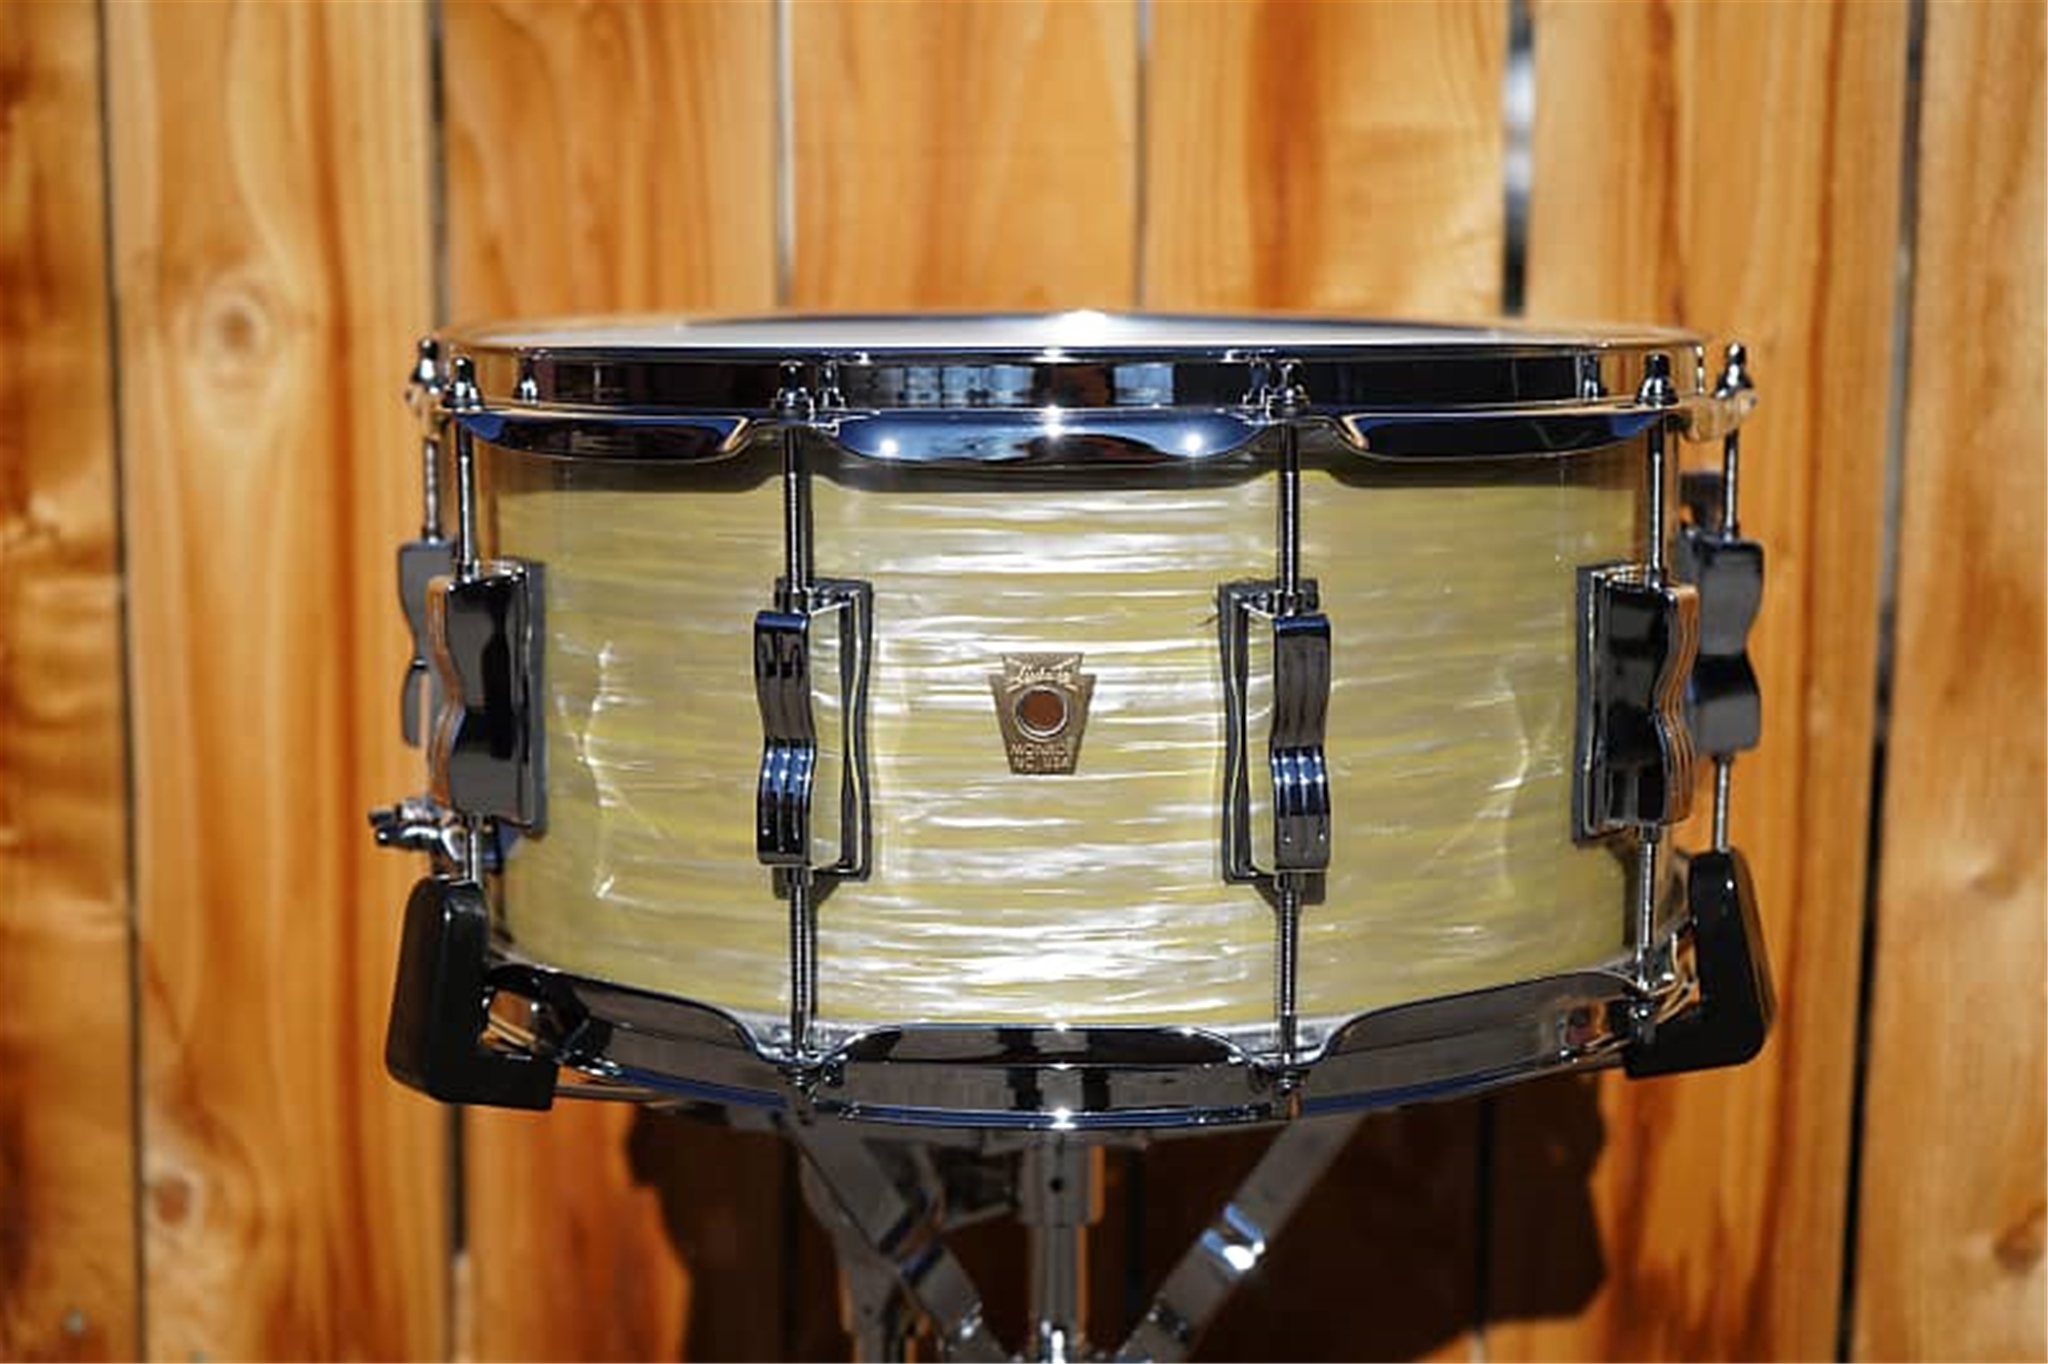 Ludwig USA Maple Classic Series (6 1/2" x 14") Snare Drum - Olive Oyster Wrap LUDWIG LS-403